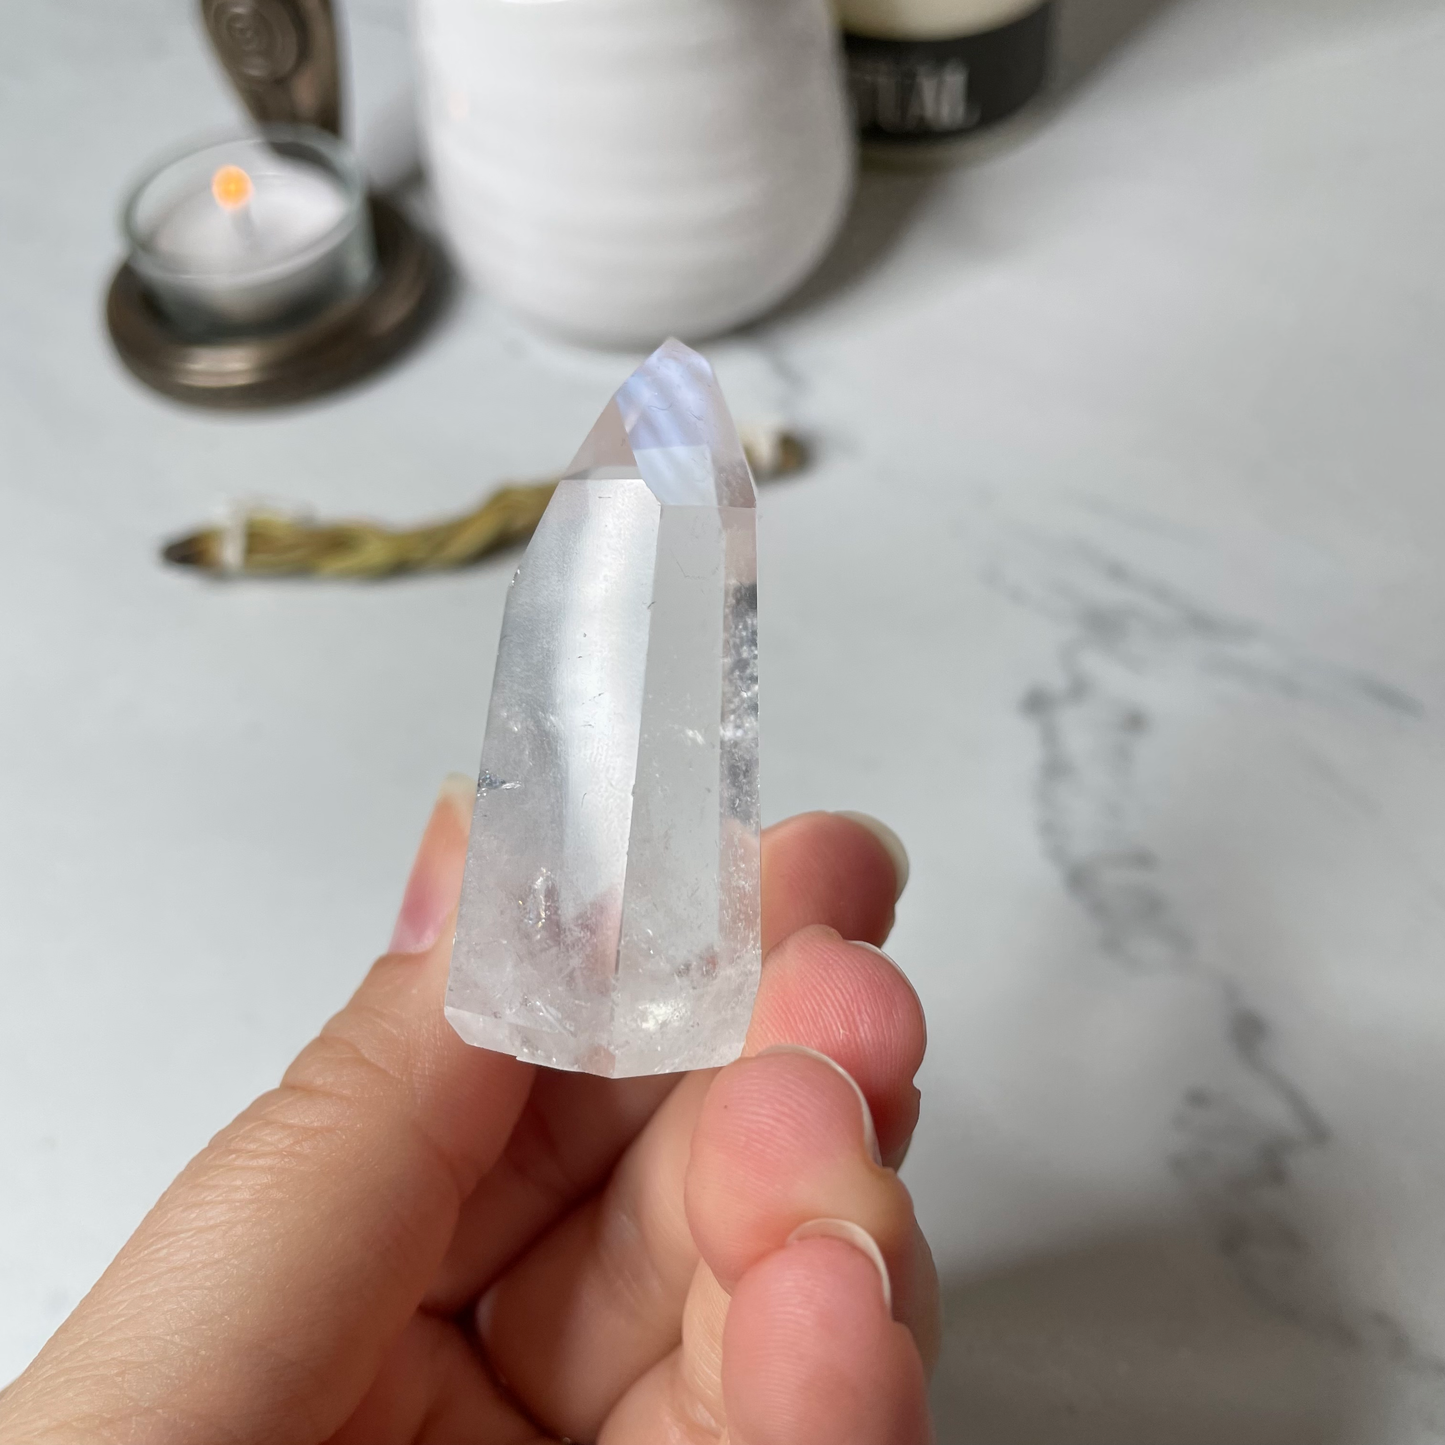 Freya's Haven | Metaphysical & Crystal shop | A close up photo of  a Lemurian seed crystal held in a woman's hand with candles in the background.